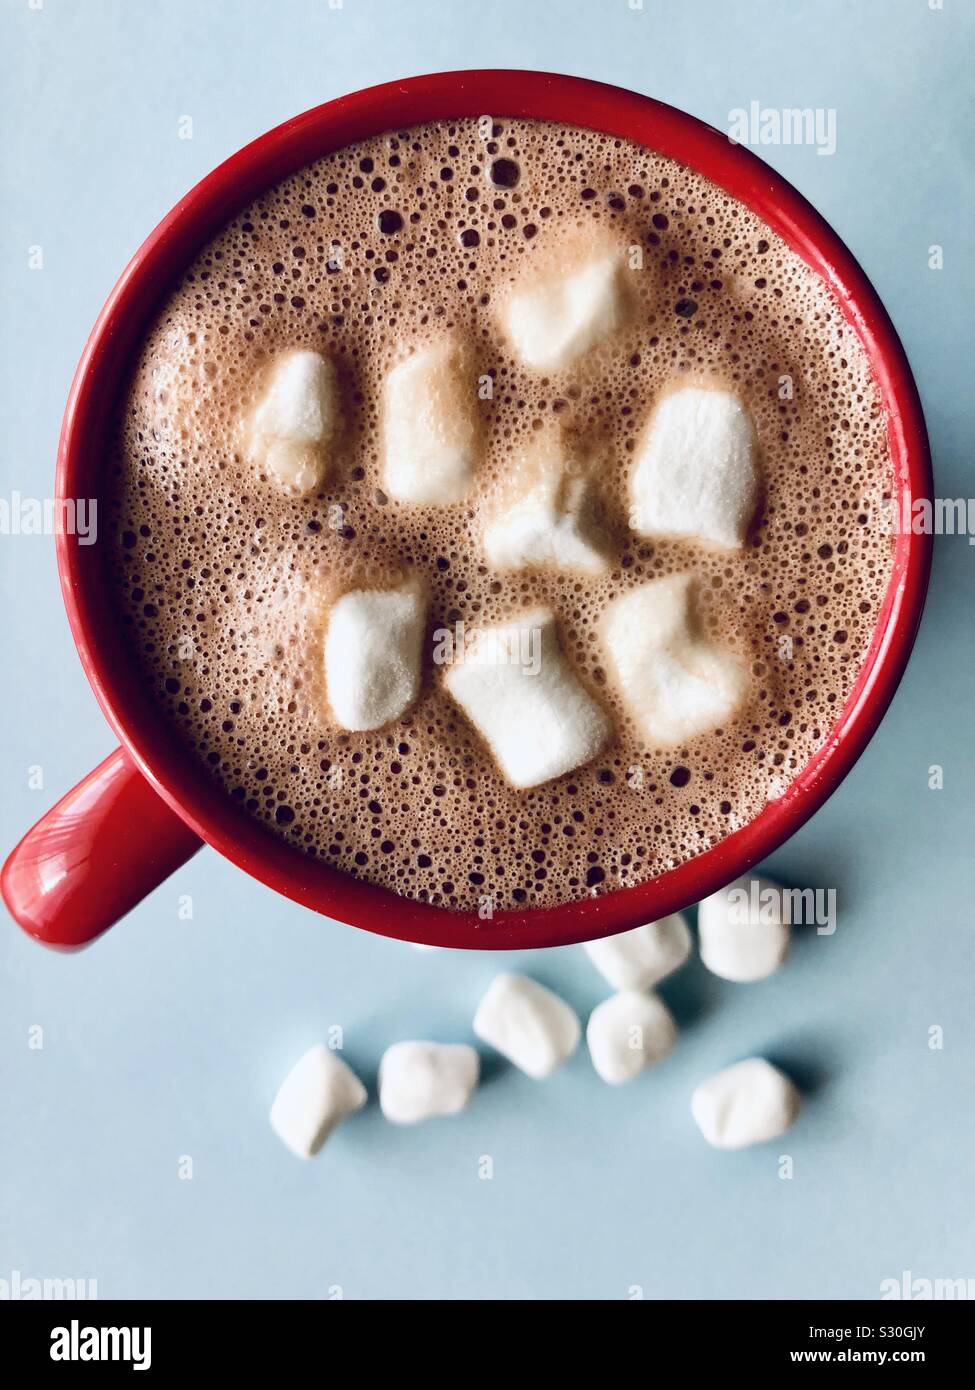 Top view of hot cocoa with marshmallows in a red mug Stock Photo